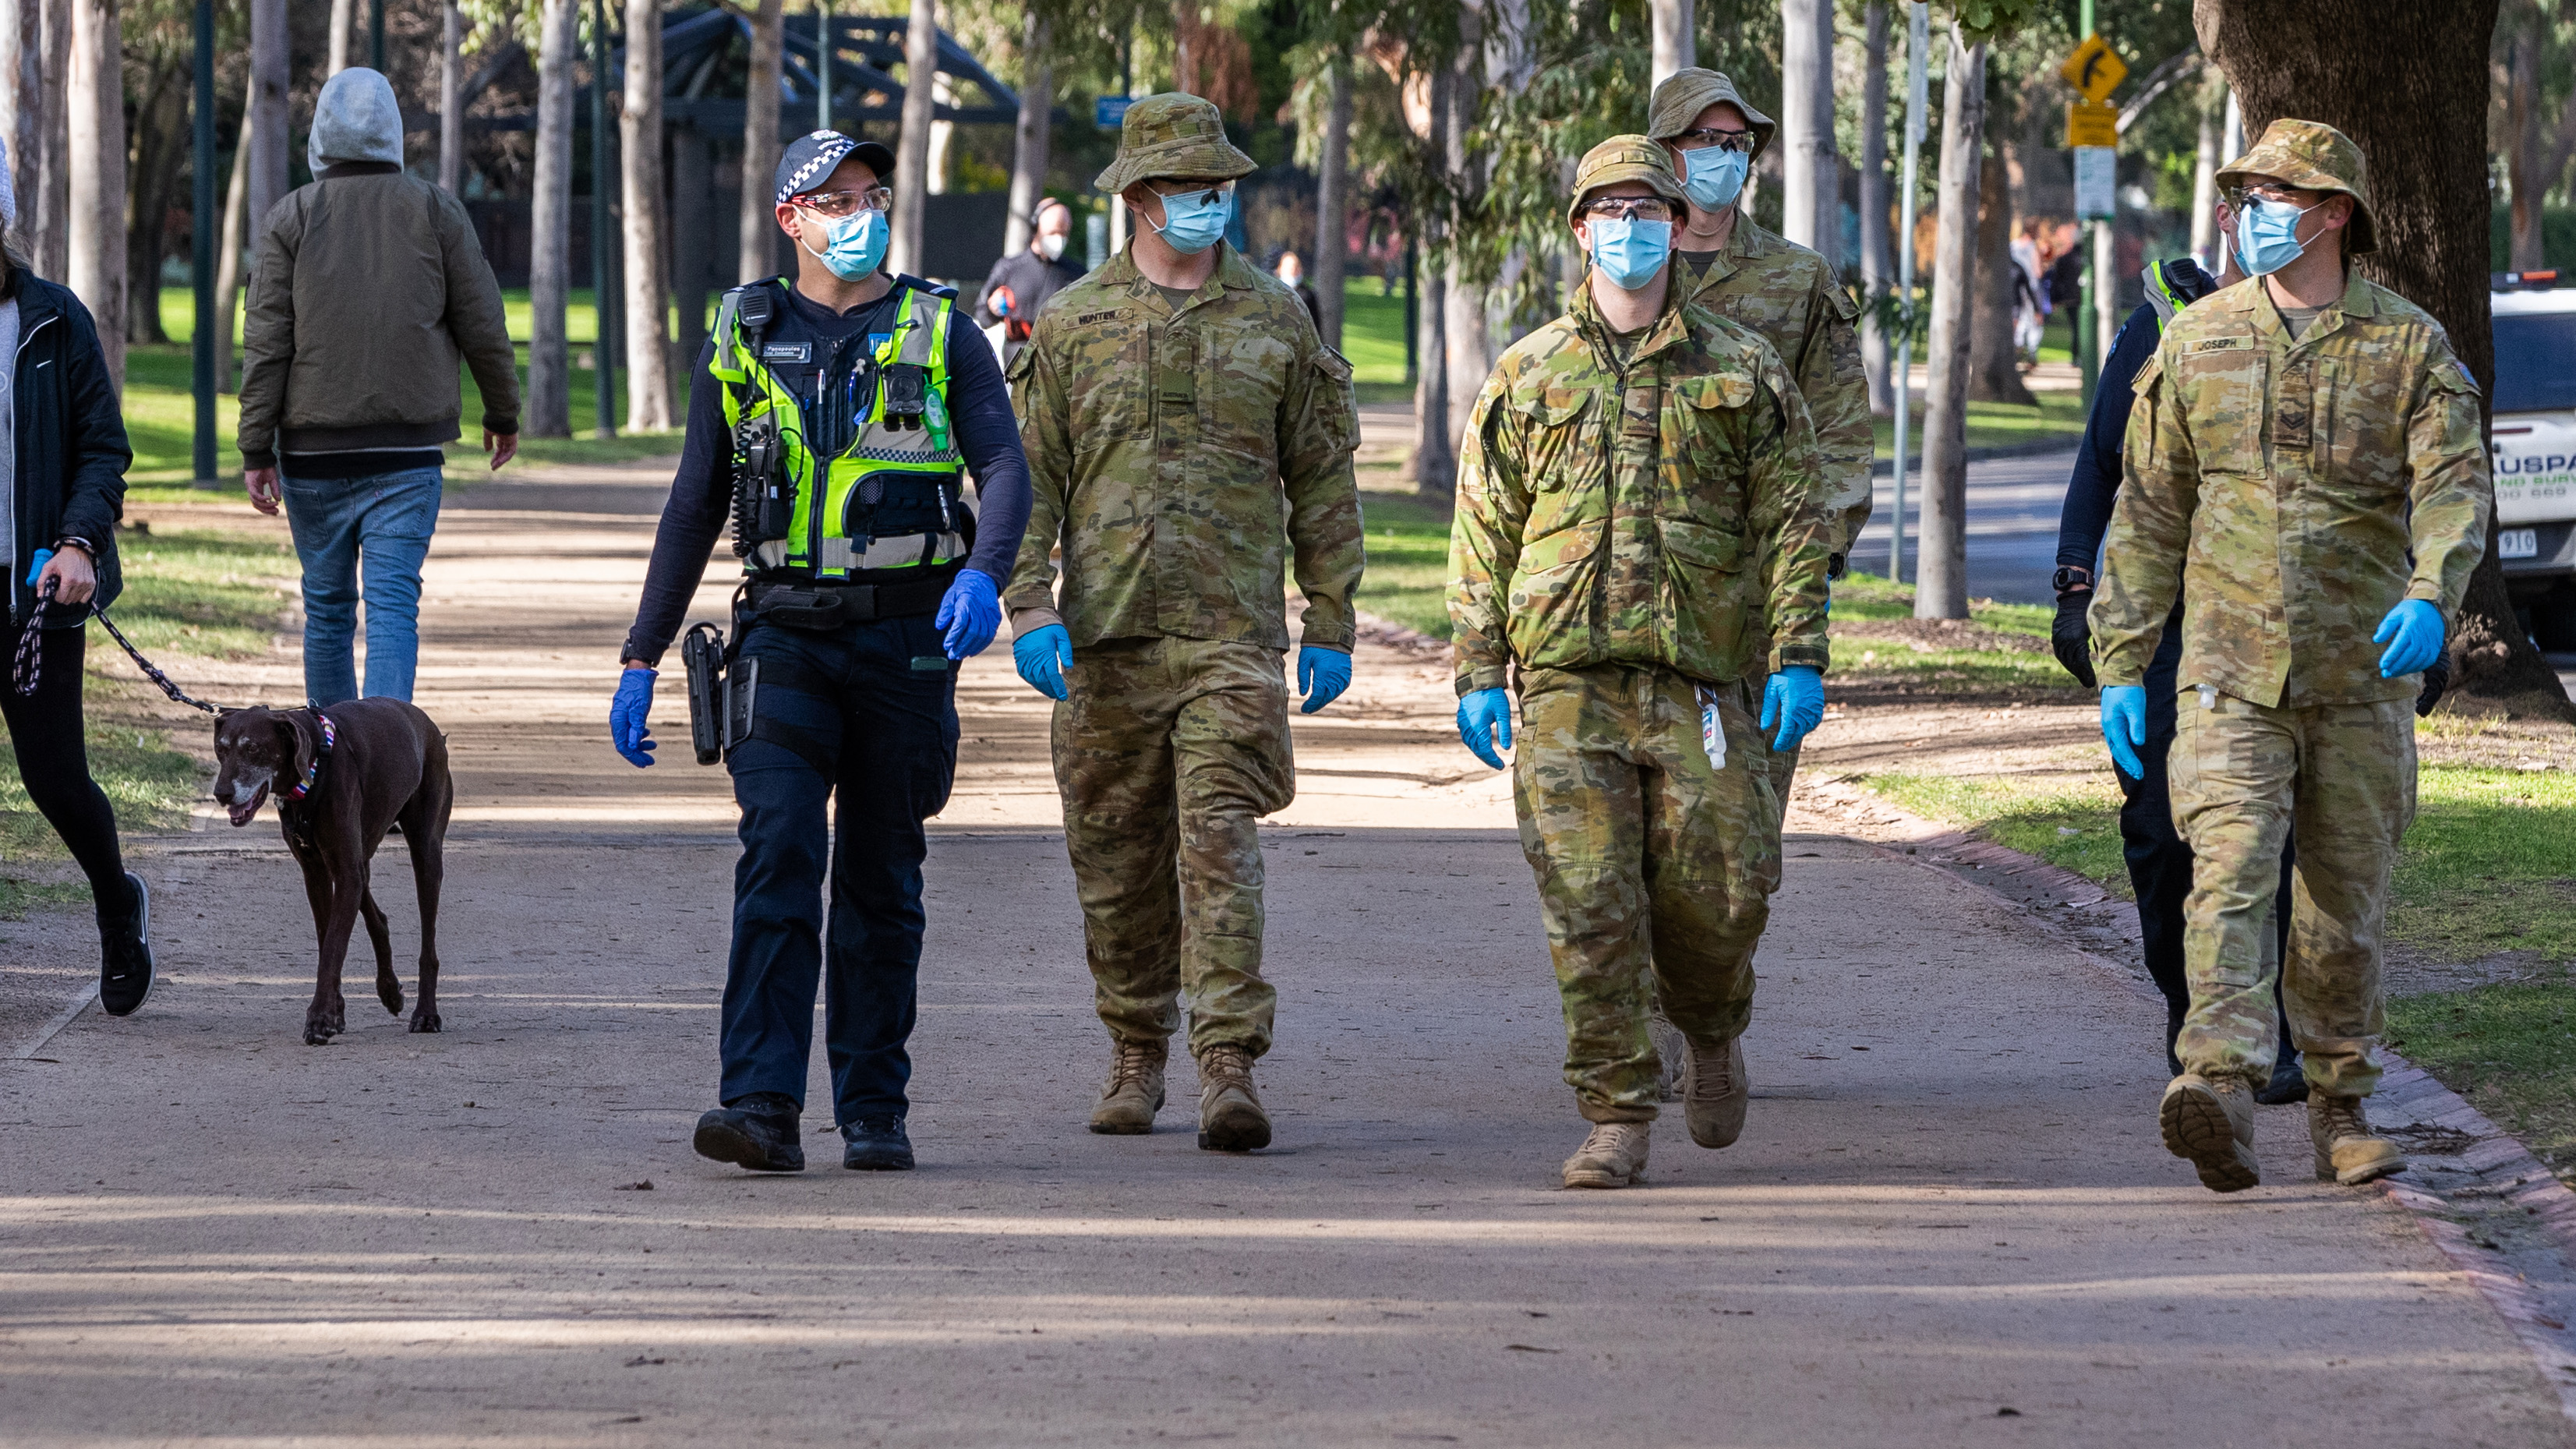 Australian Defense Force (ADF) personnel and Protective service officers are seen on patrol at the Tan running track on August 06, 2020 in Melbourne, Australia.  